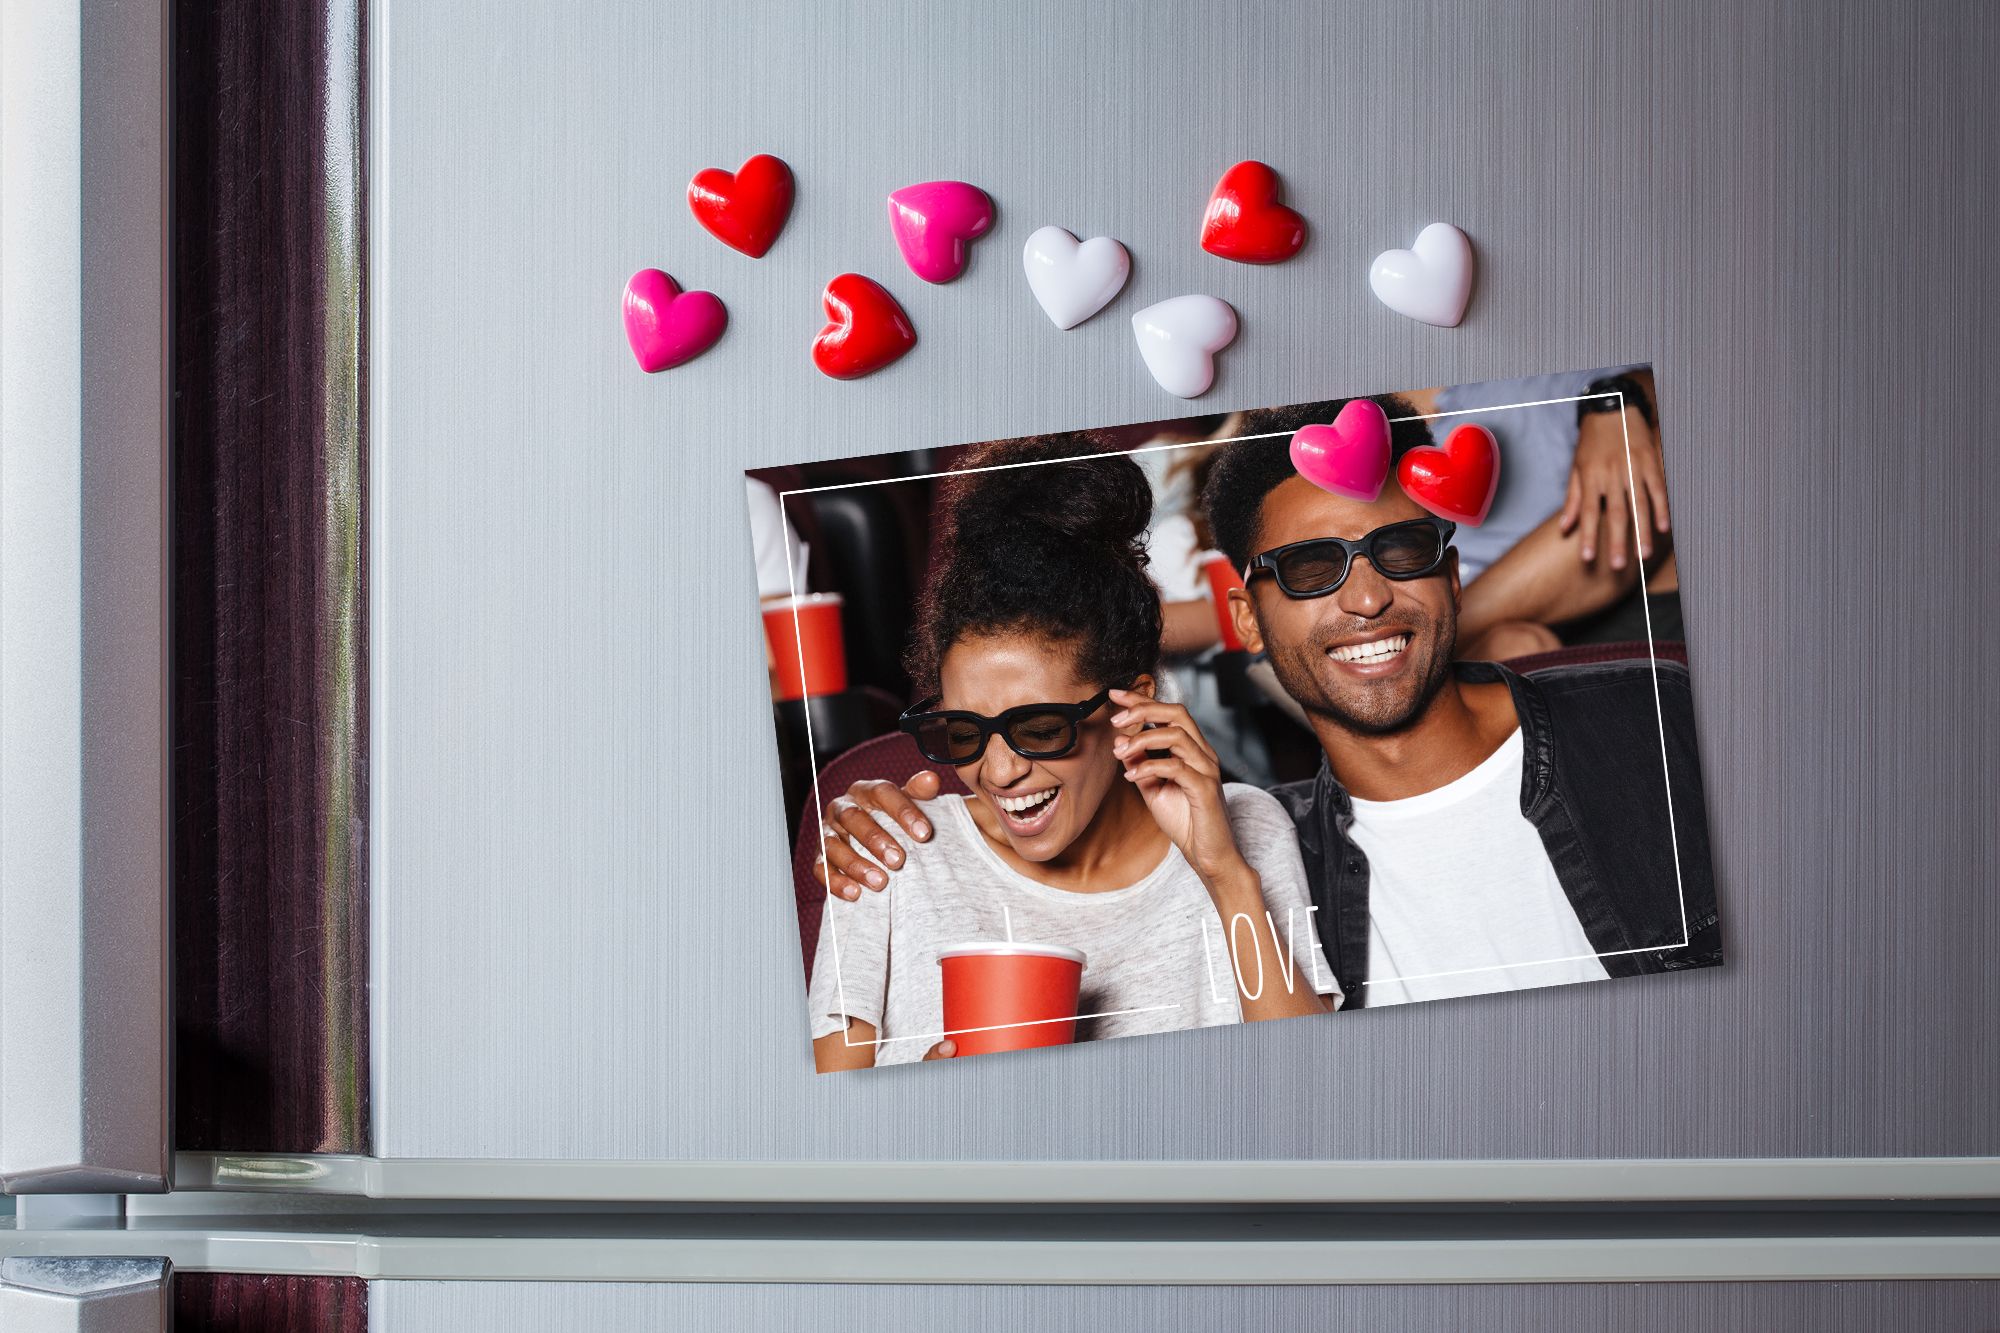 The classic photo card makes a romantic gift for any Valentine's Day